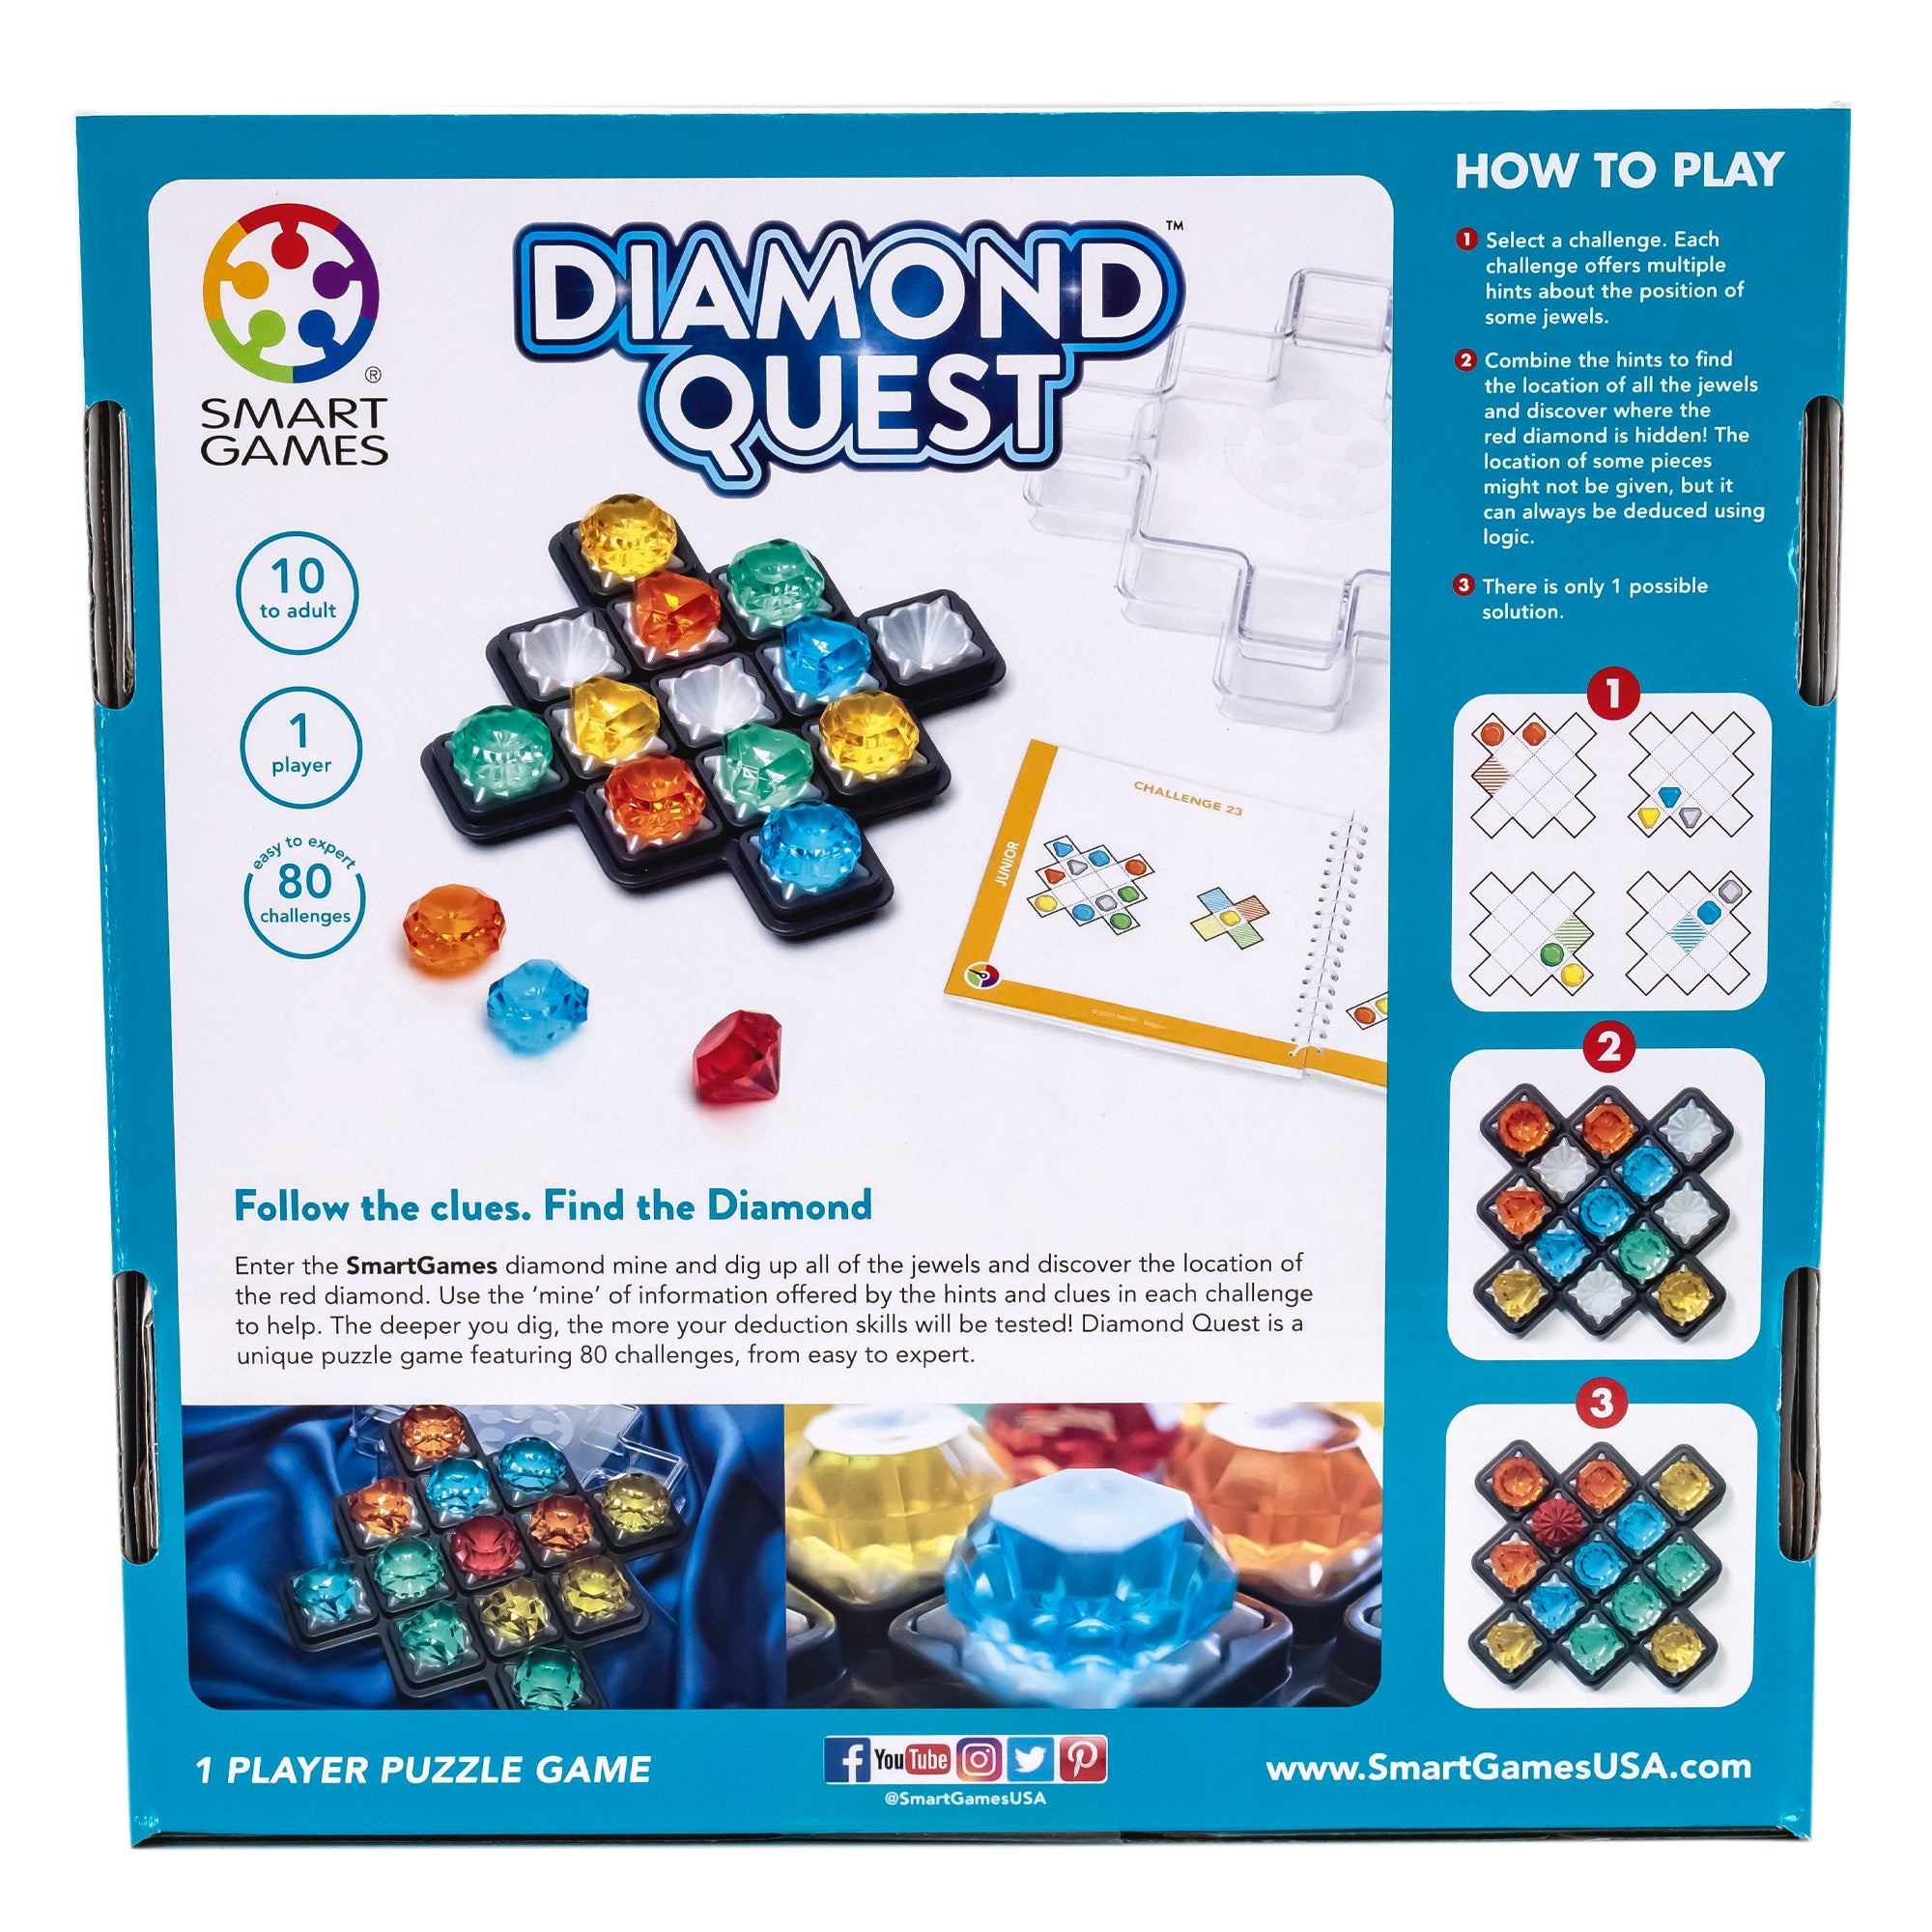 The Diamond Quest Smart Game box back. The main picture shows the game board with many gem pieces in place and 3 gems scattered in front of the game board. Below are 2 more pictures of the game board with pieces in place. To the right are 3 pictures showing how to play the game. The box indicates that the game is 1-player and recommended for ages 10 and older. There are 80 challenges.